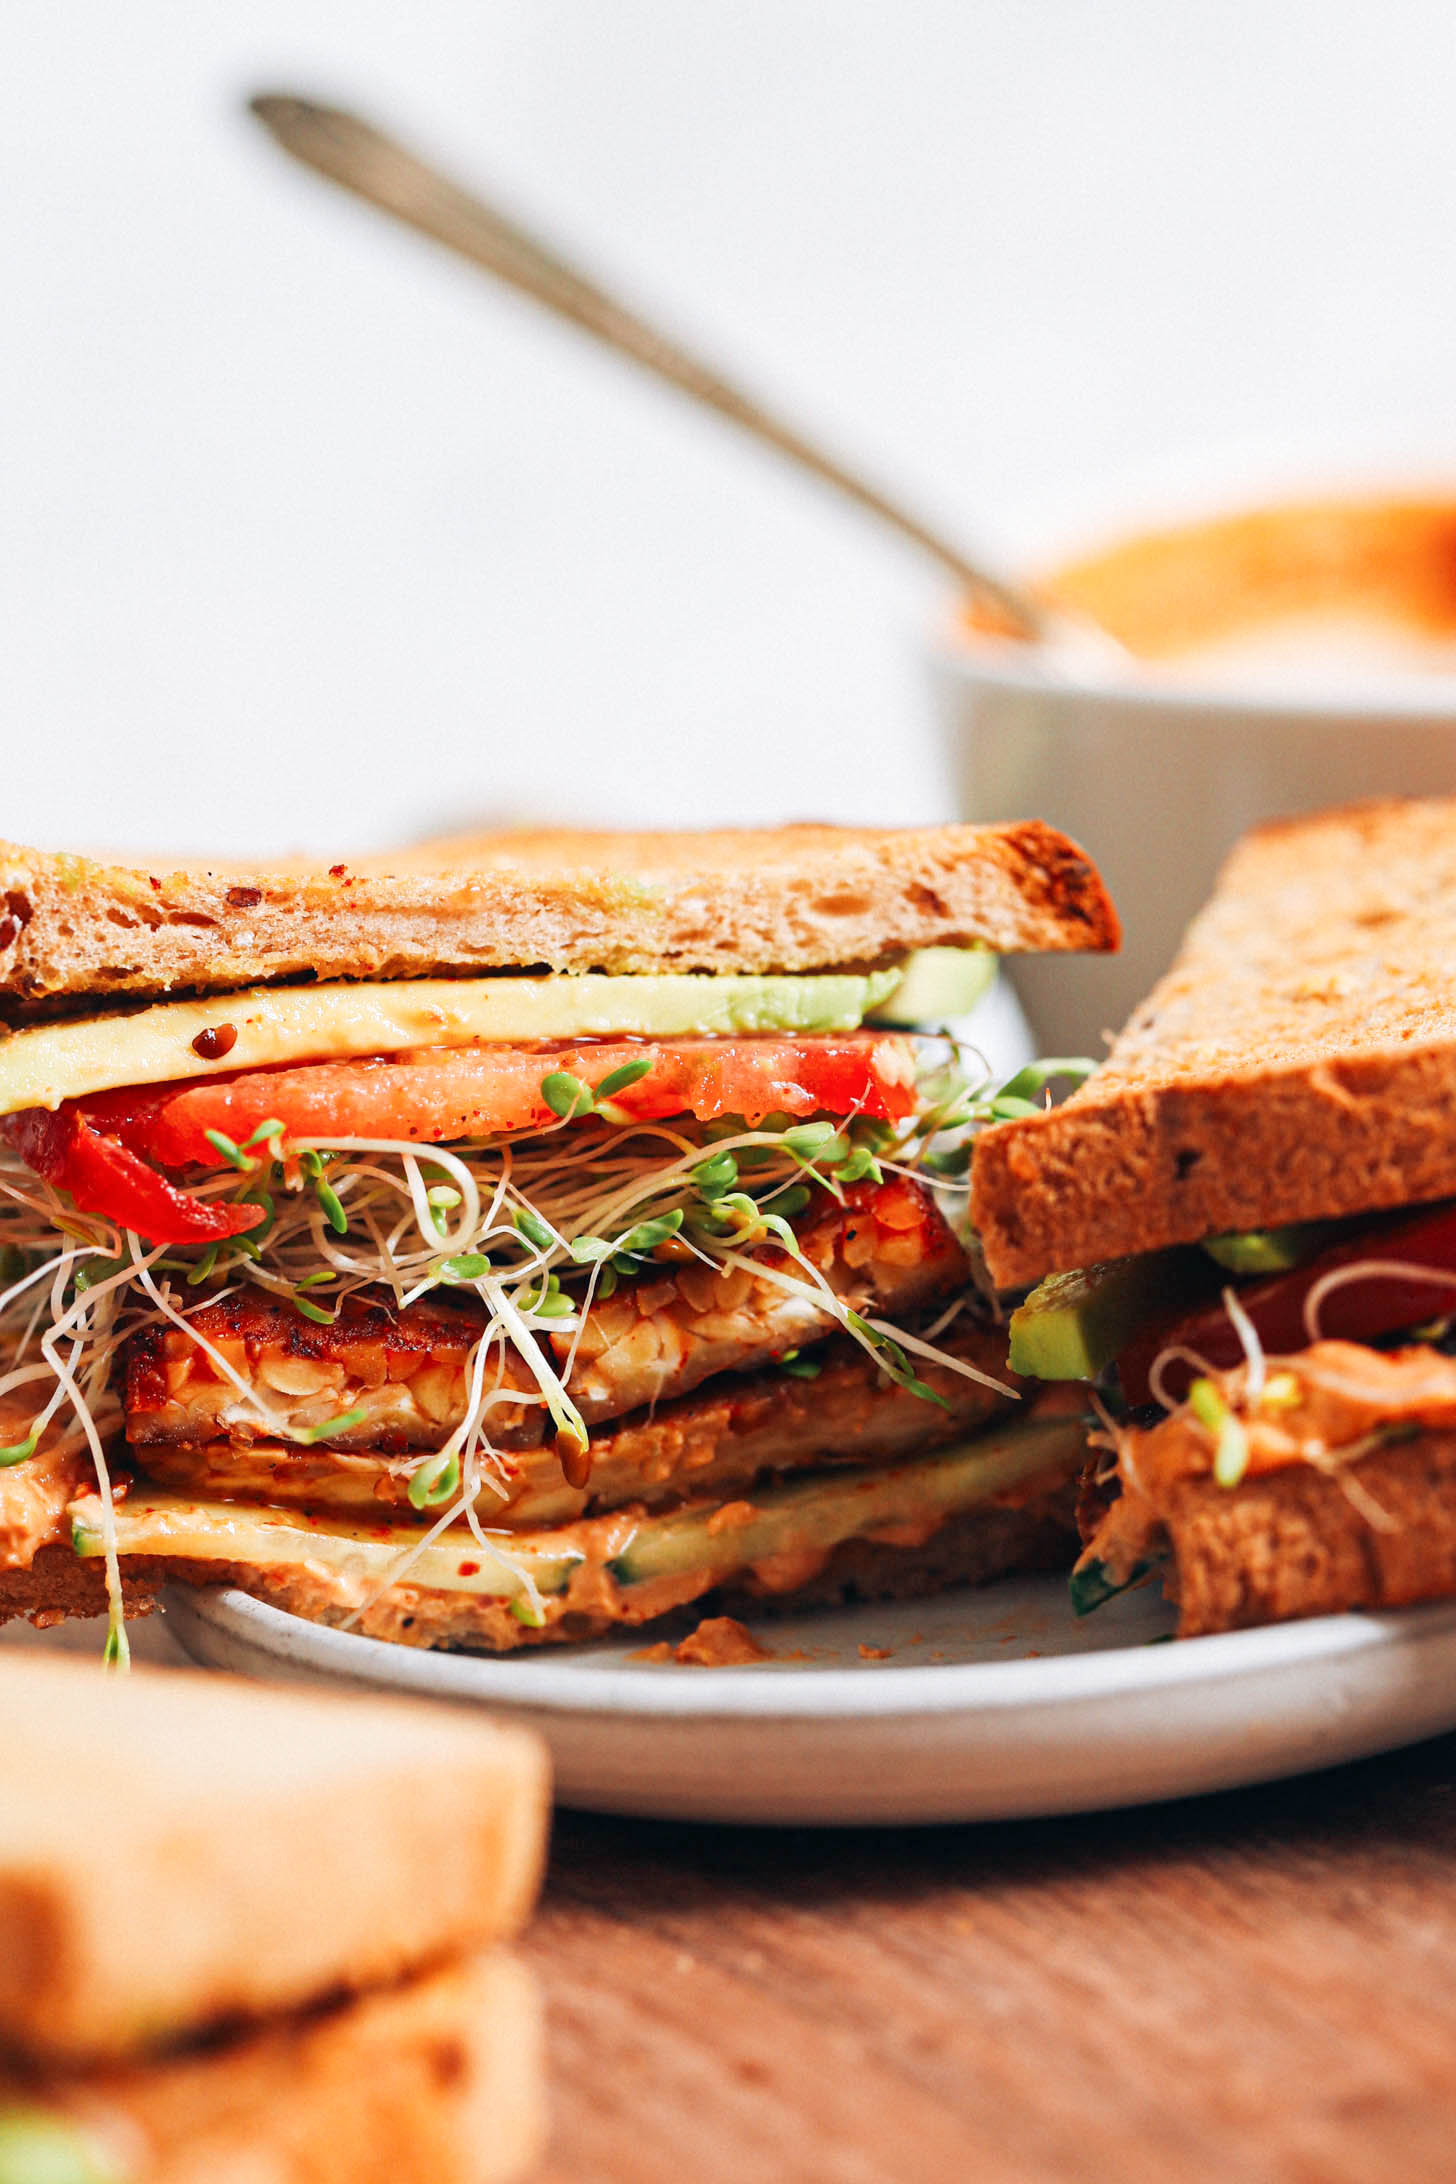 Sandwich with layers of avocado, tomato, sprouts, tempeh bacon, cucumber, and chipotle hummus